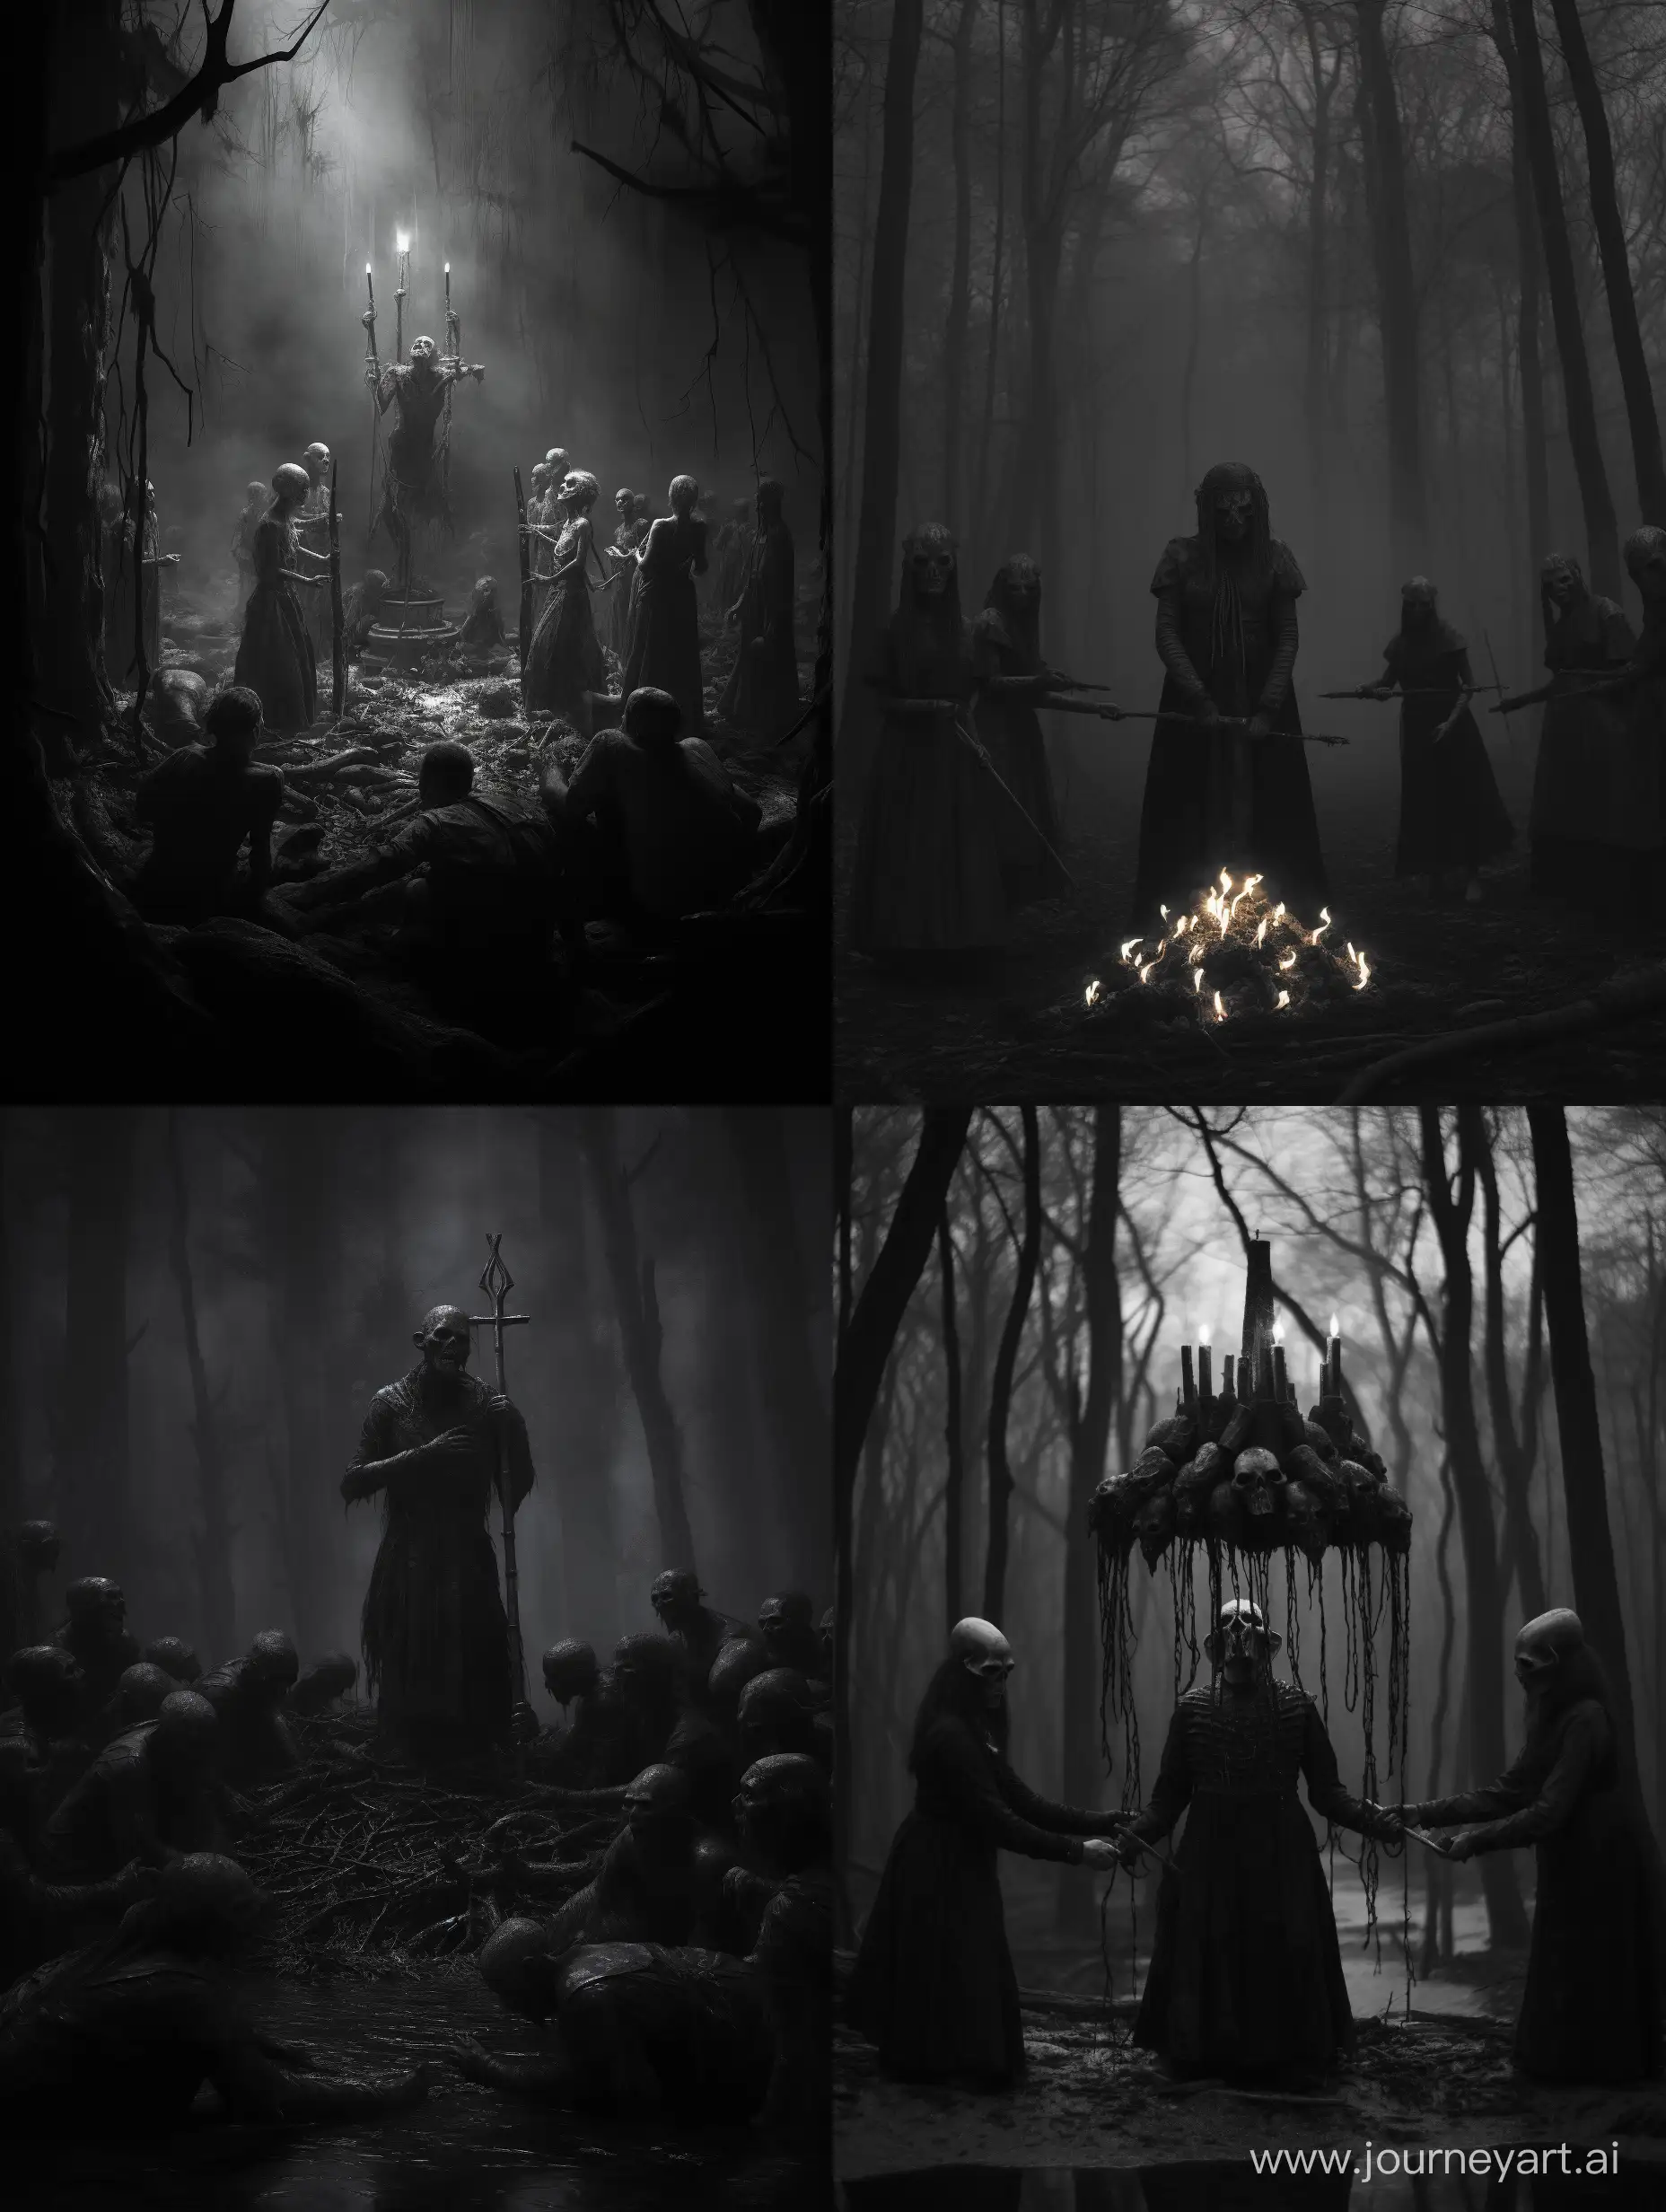 Pagan-Worshippers-Performing-Ritualistic-Sacrifice-in-Grayscale-Horror-Scene